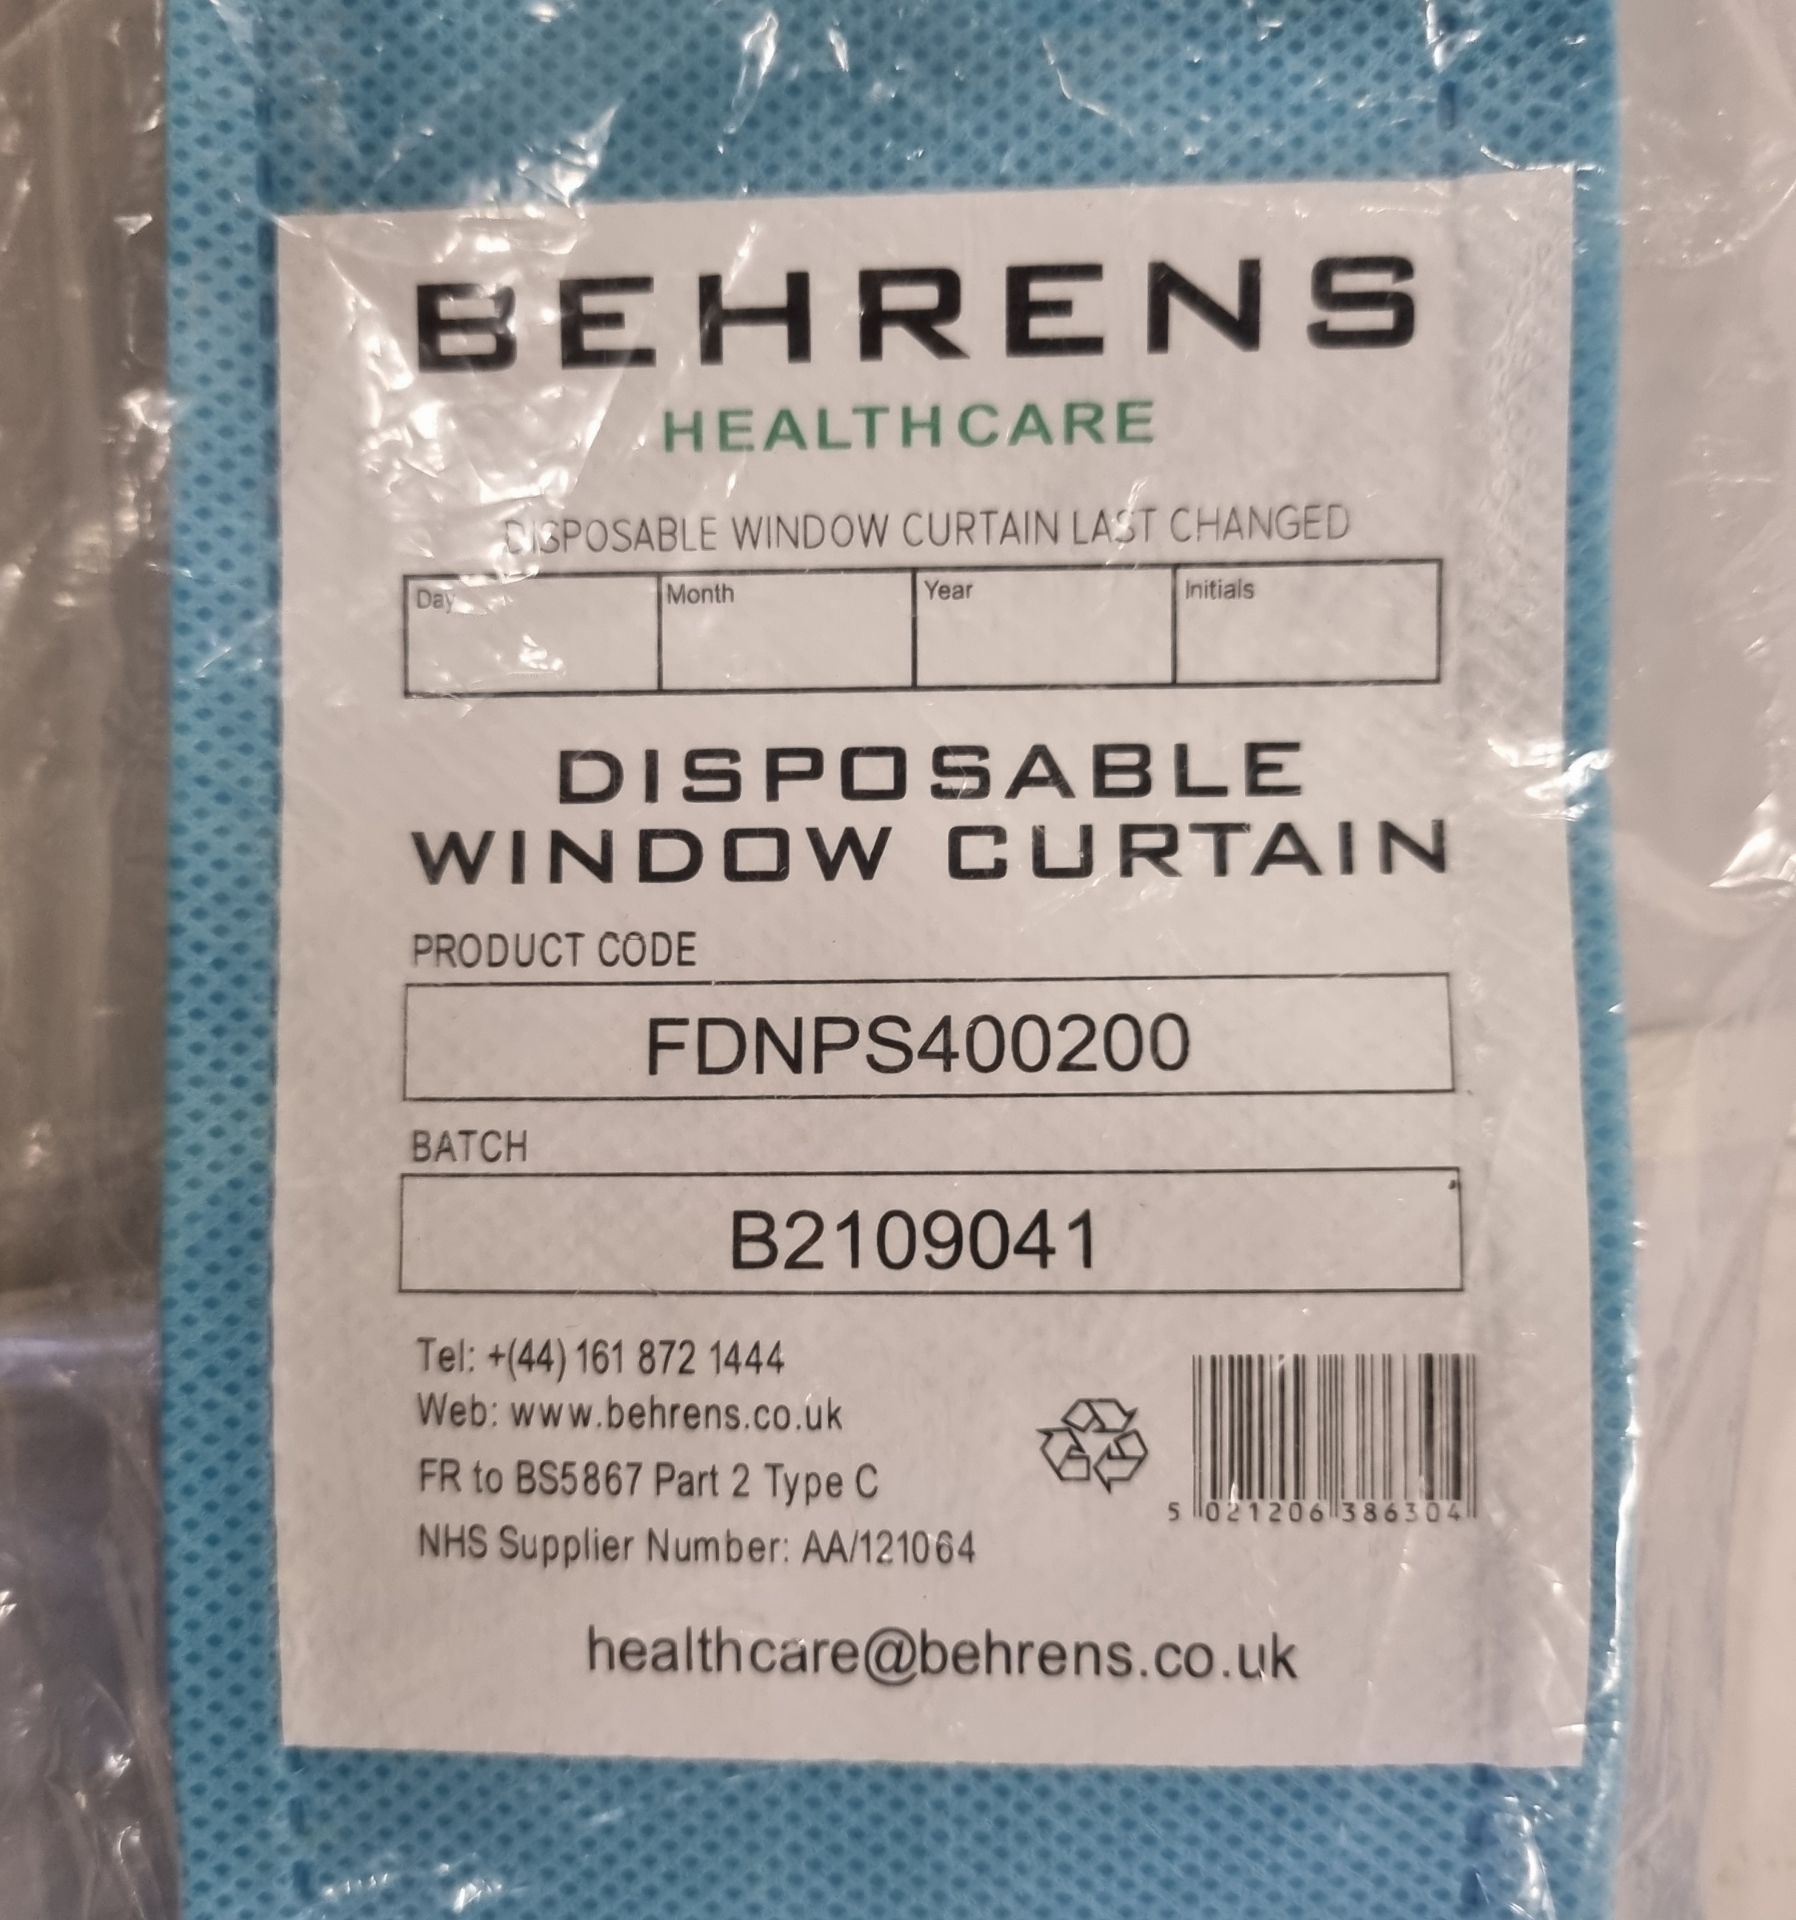 6x boxes of Behrens FDNPS400200 blue disposable cubicle curtains - approx 20 pcs per box - Image 4 of 4